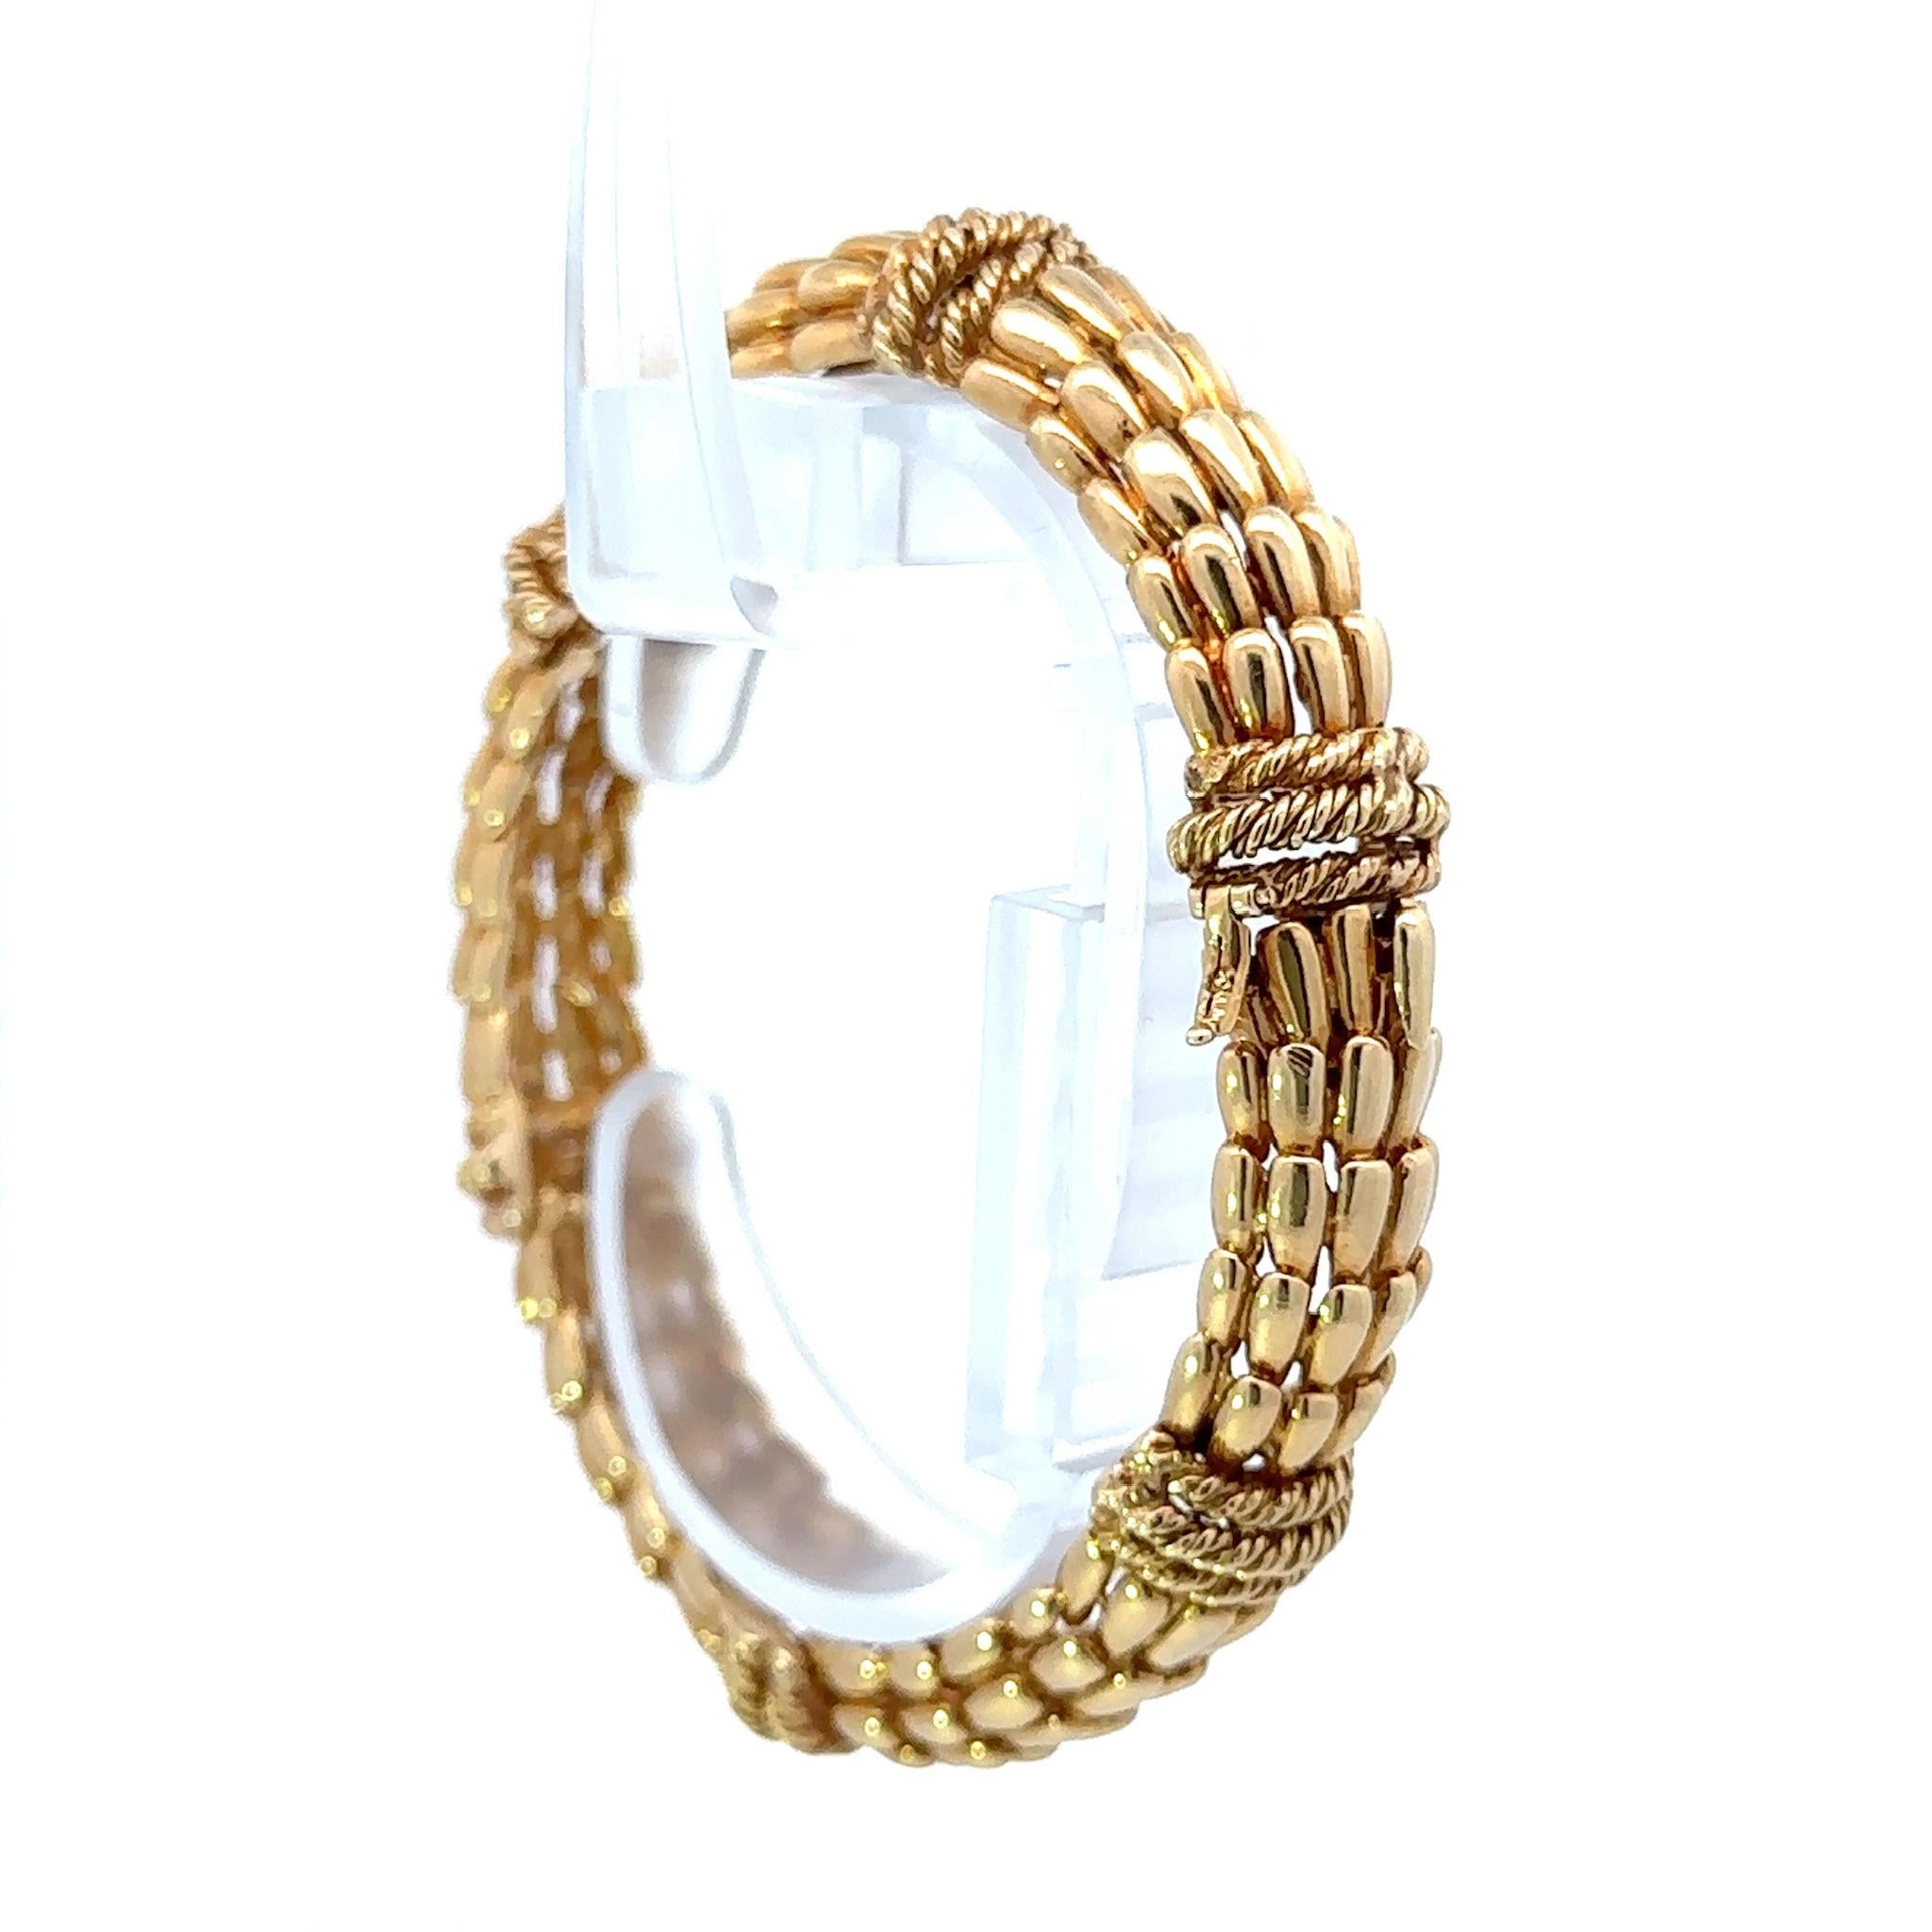 Magnificent 1970’S, 18K Yellow Gold David Webb “FISHSCALE” bracelet. This is composed beautifully with braided detailing and unique rope work - hand crafted to perfection. This is a gorgeous dimensional bracelet that will always a remain a timeless,